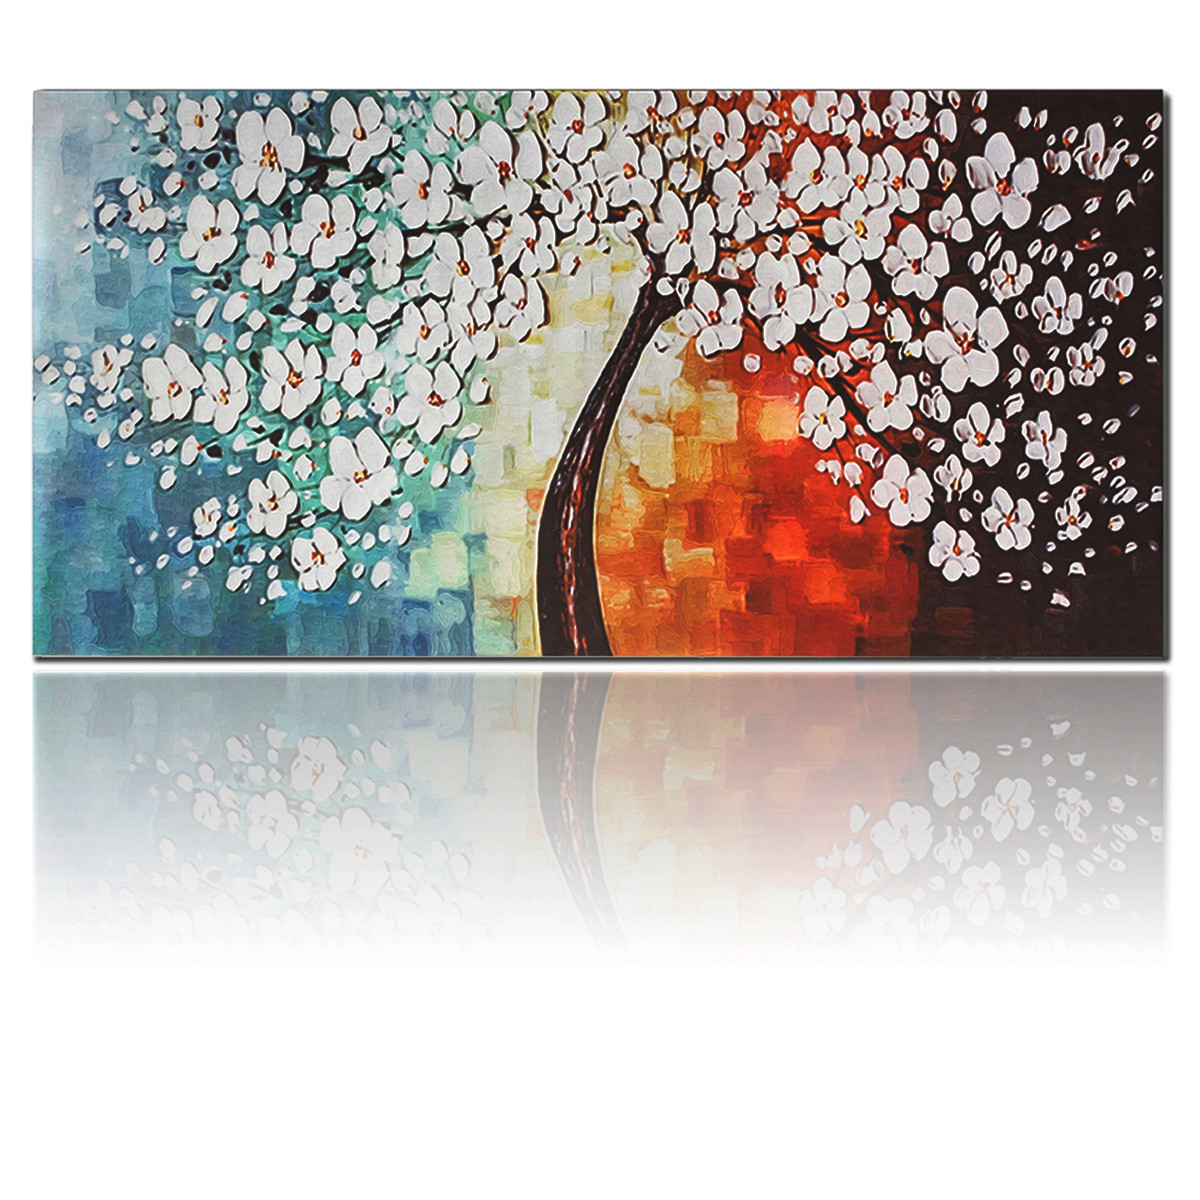 White-Plum-Flower-Tree-Oil-Paintings-Unframed-Canvas-Print-Wall-Art-Picture-Home-Decorations-1582919-3